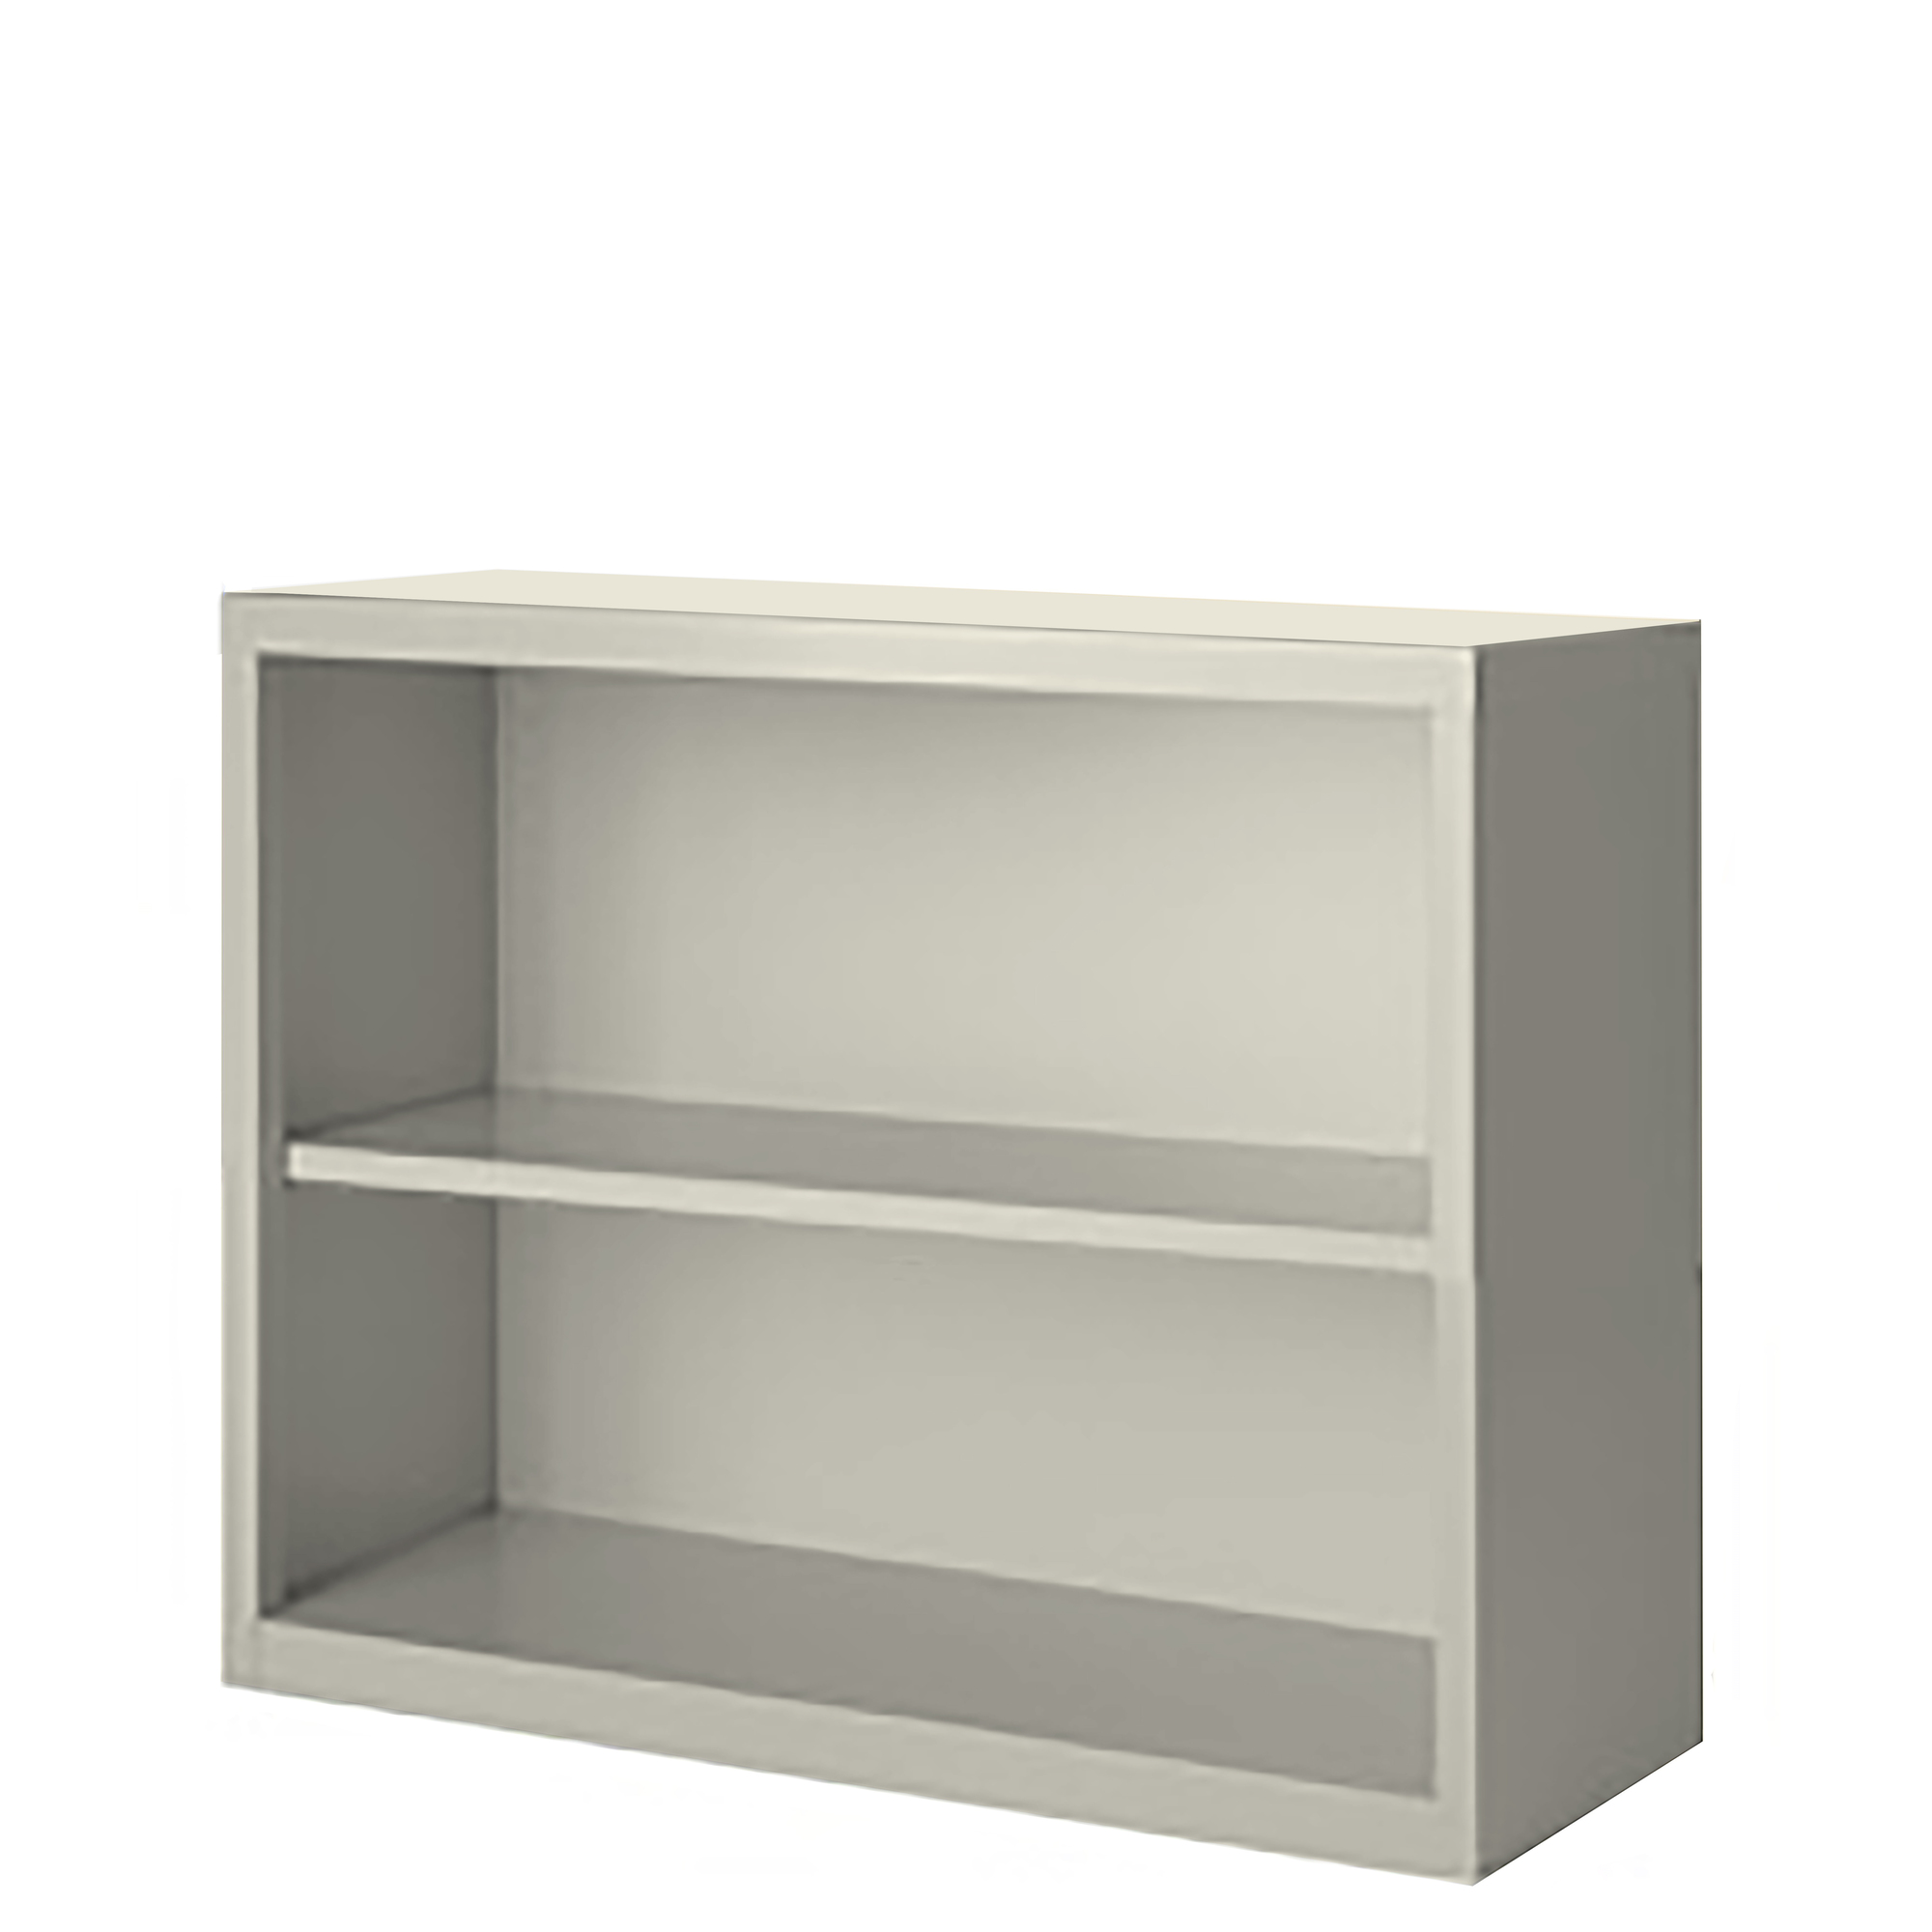 Steel Cabinets USA, 36Inchx18Inchx30Inch Putty Bookcase Steel Fully Assembled, Height 30 in, Shelves (qty.) 2, Material Steel, Model BCA-363018-P